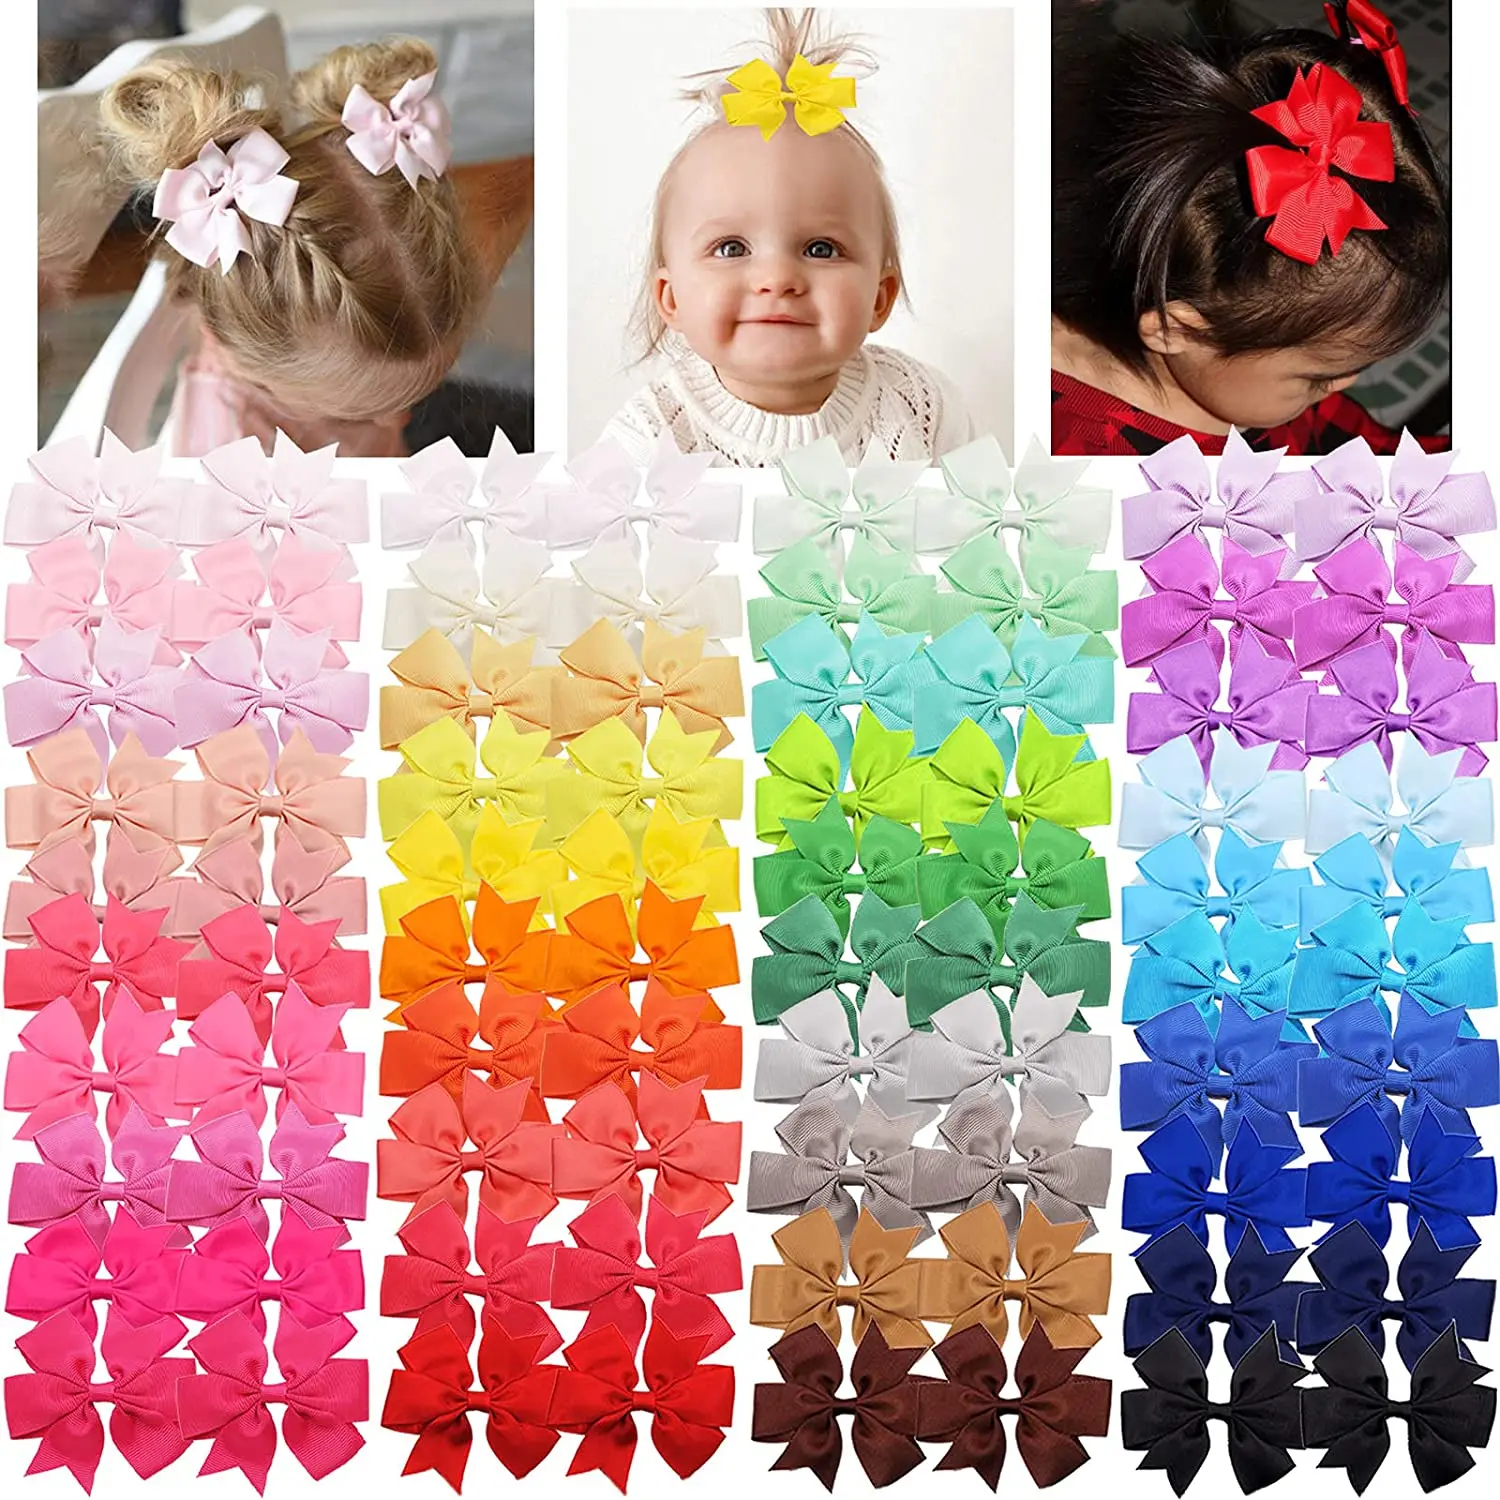 80PCS 3.5inch Hair Bows Clips for Baby Girls Infants Toddlers Grosgrain Ribbon Alligator Hairpins Barrettes Children Kids Gifts